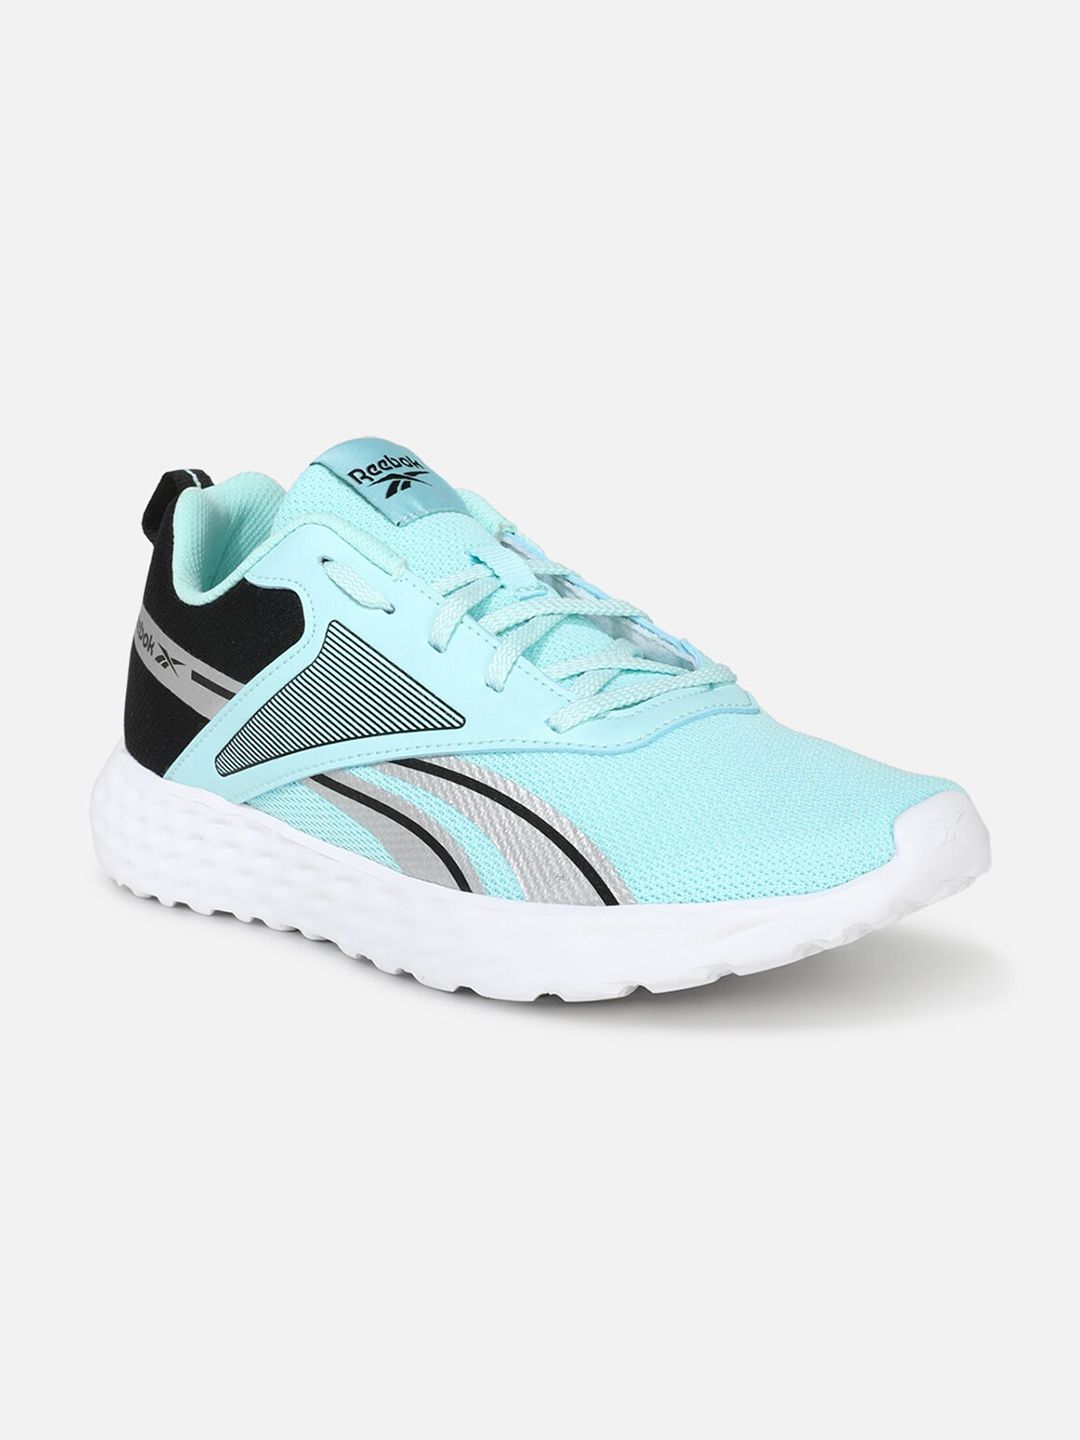 Reebok Women Running Super Connect W Shoes Price in India